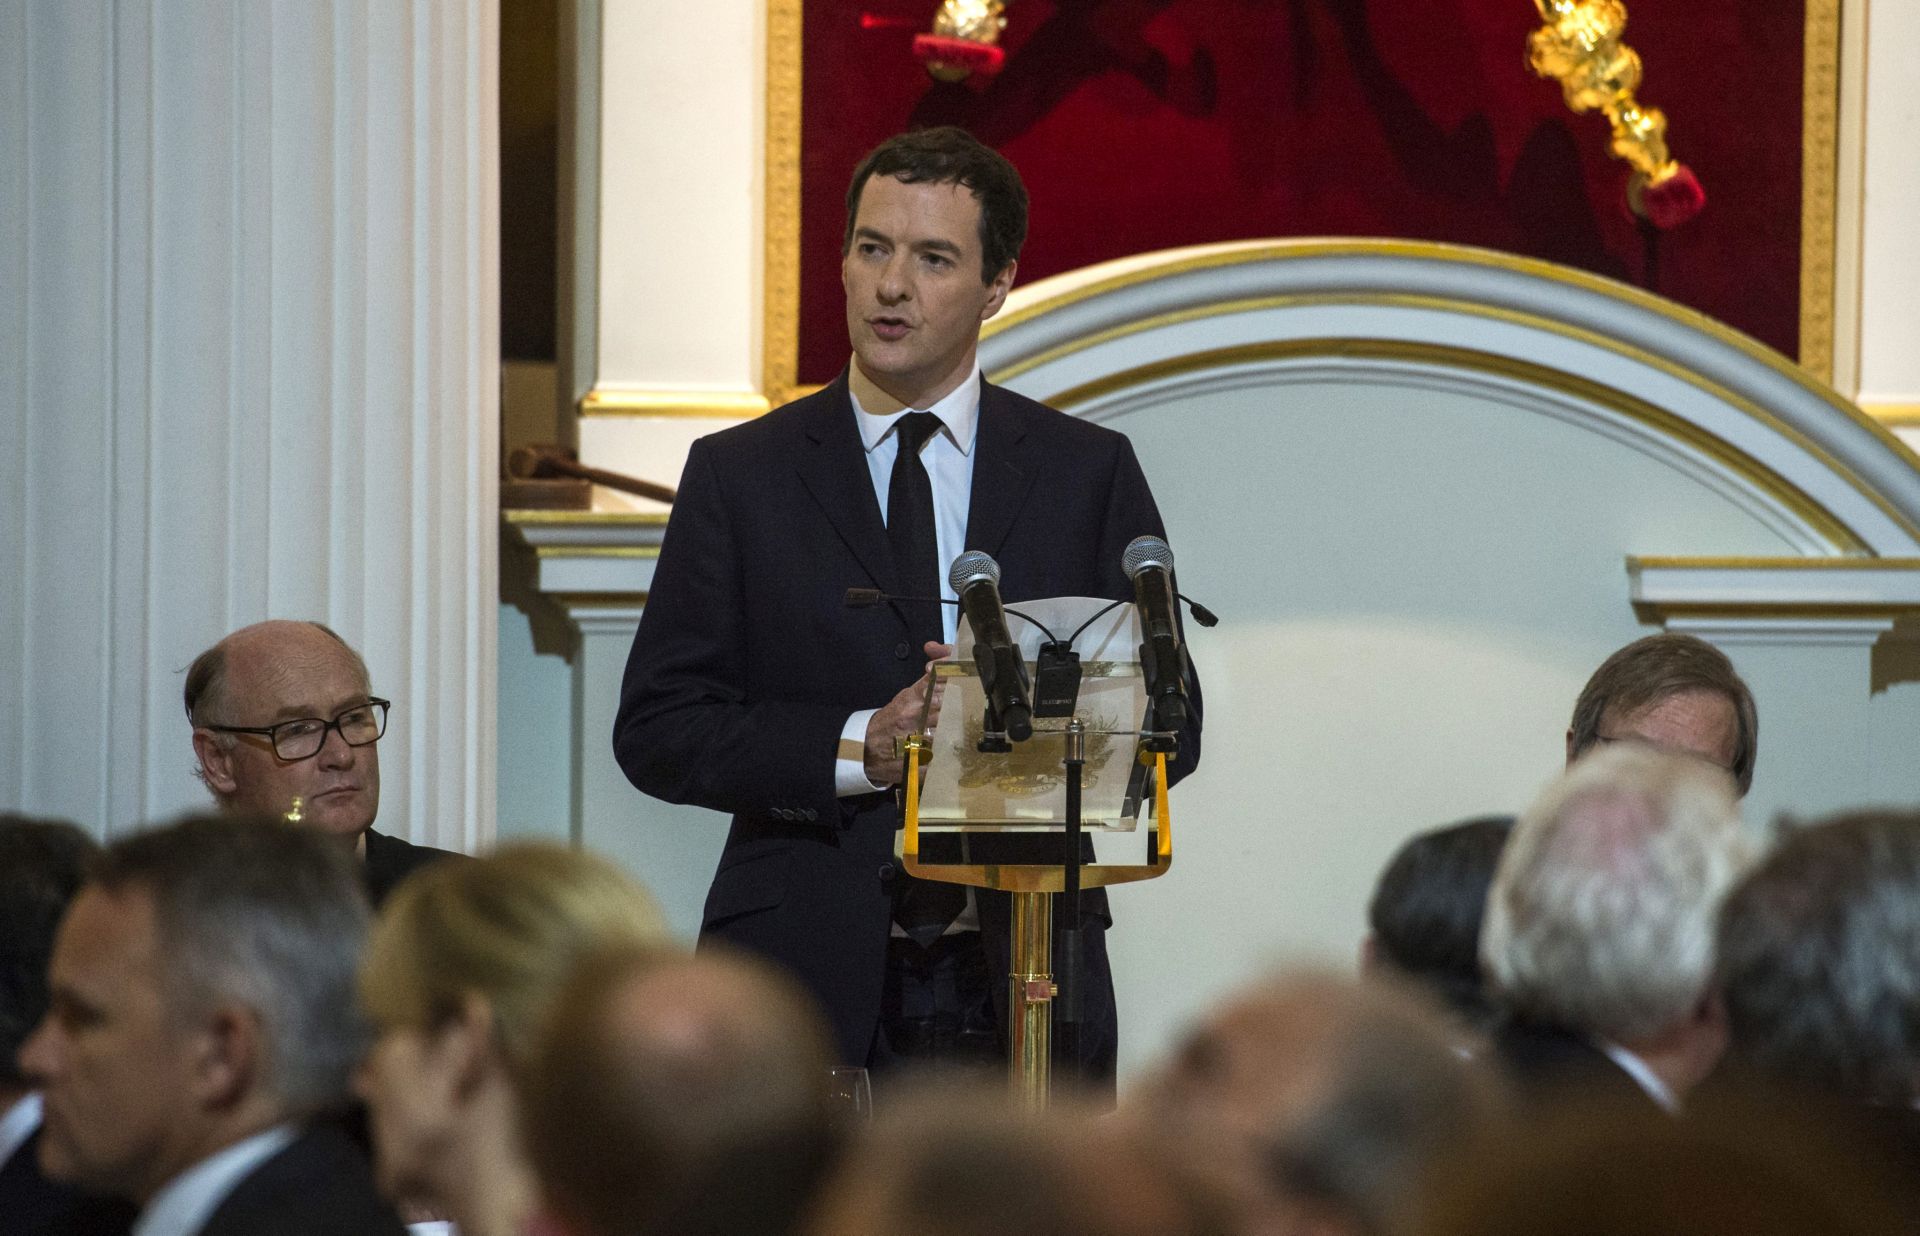 epa05370654 British Chancellor of the Exchequer George Osborne delivers a speech during the Bankers and Merchant's Dinner at the Mansion House in London, Britain, 16 June 2016. The dinner comes after the news of the murder of British MP Jo Cox who was reported dead at the hospital in Leeds after being shot and critically injured in Birstall. Cox was airlfted from the attack scene to a hospital in Leeds where she later died. Cox has in recent weeks campaigned for the Remain camp.  EPA/WILL OLIVER